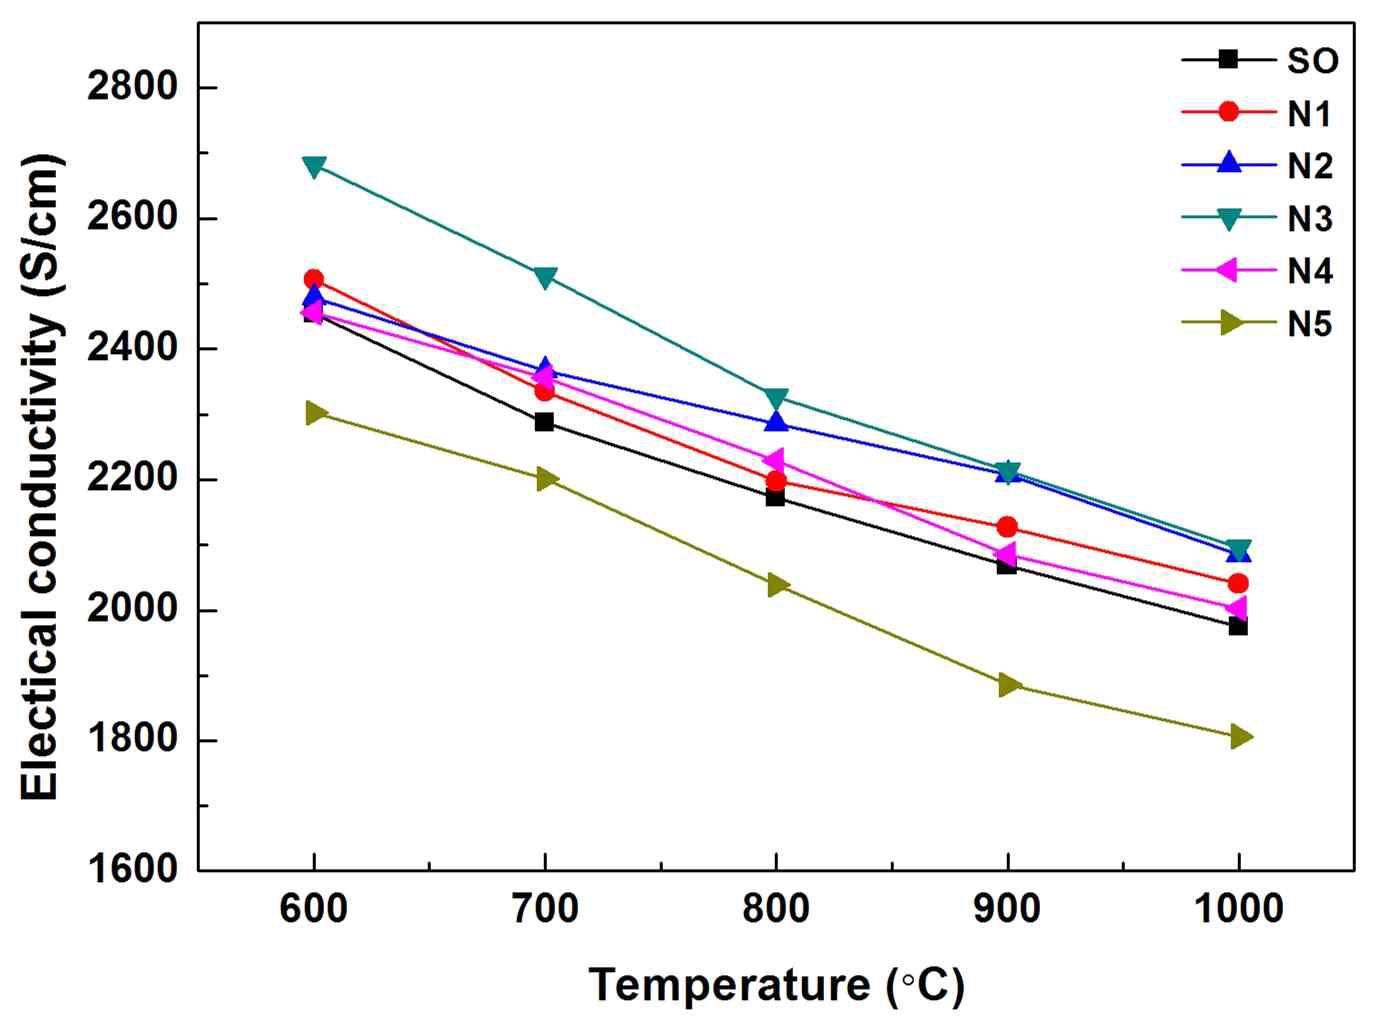 Electrical conductivity of the samples sintered at 1,350 ℃ followed by a reduction at 1,000 ℃: sample (a) SO, (b) N1, (c) N2, (d) N3, (e) N4, and (f) N5.